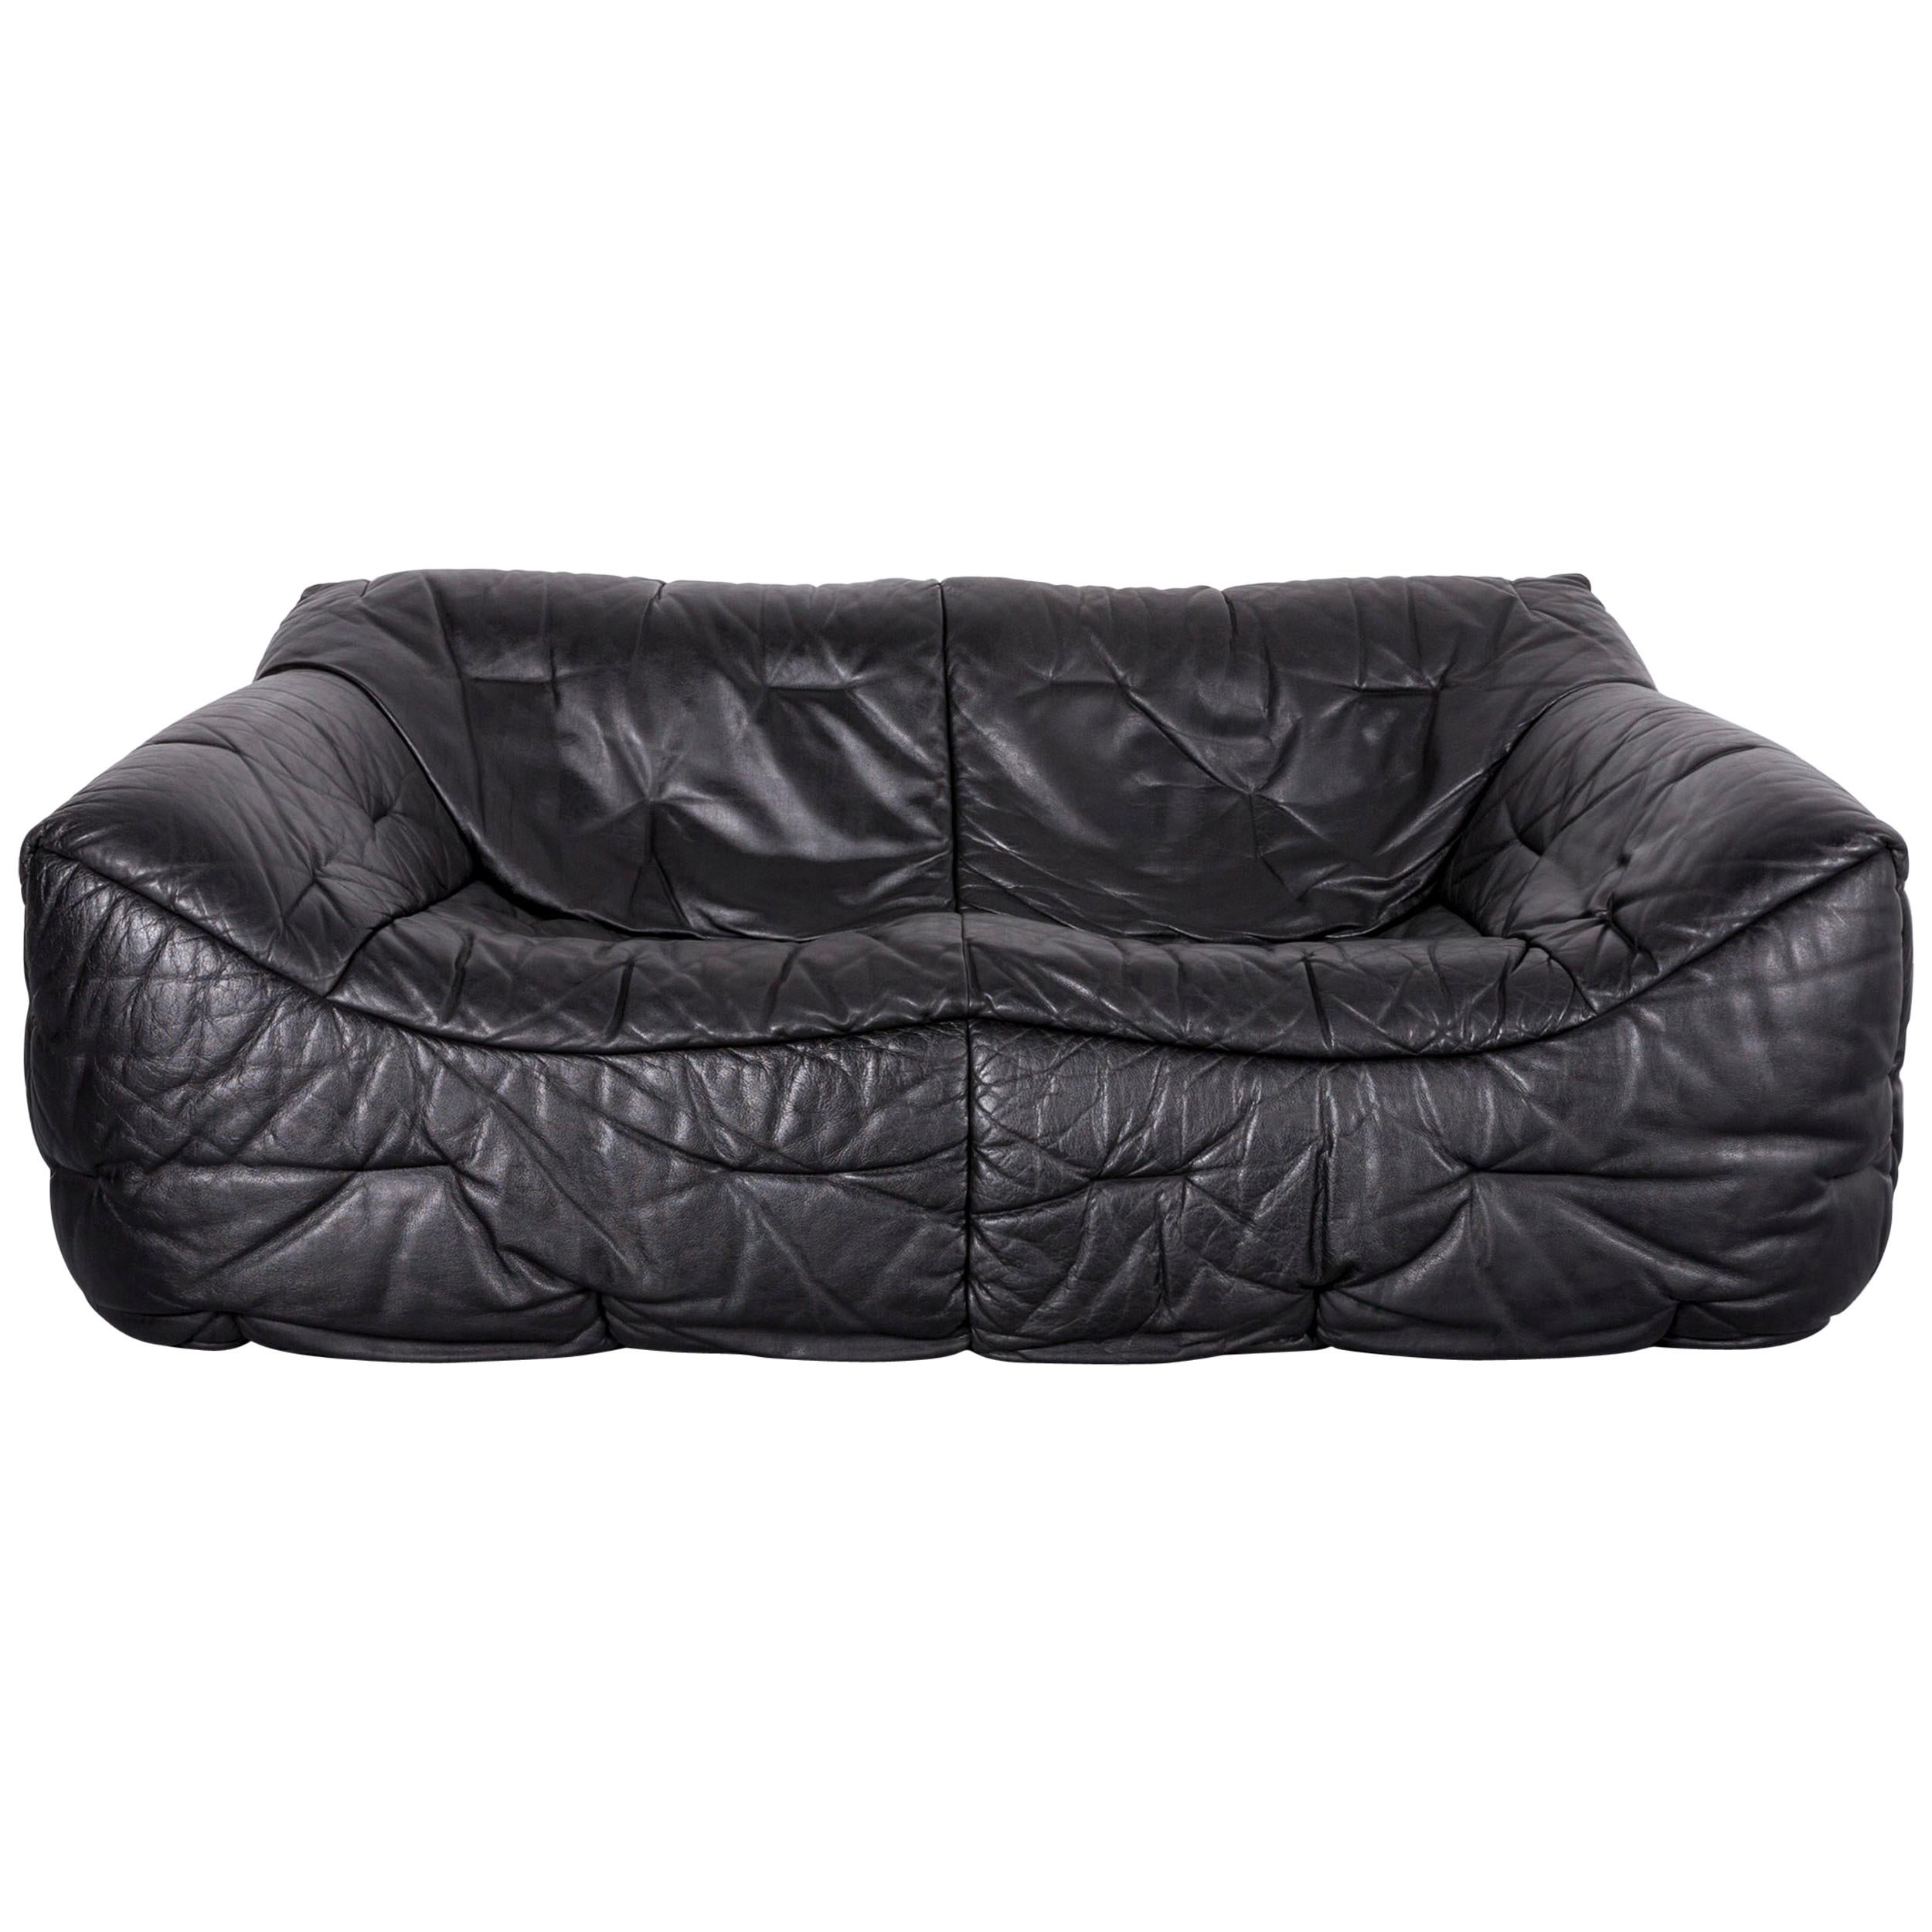 Roche Bobois Informel Leather Sofa Black Two-Seat Couch